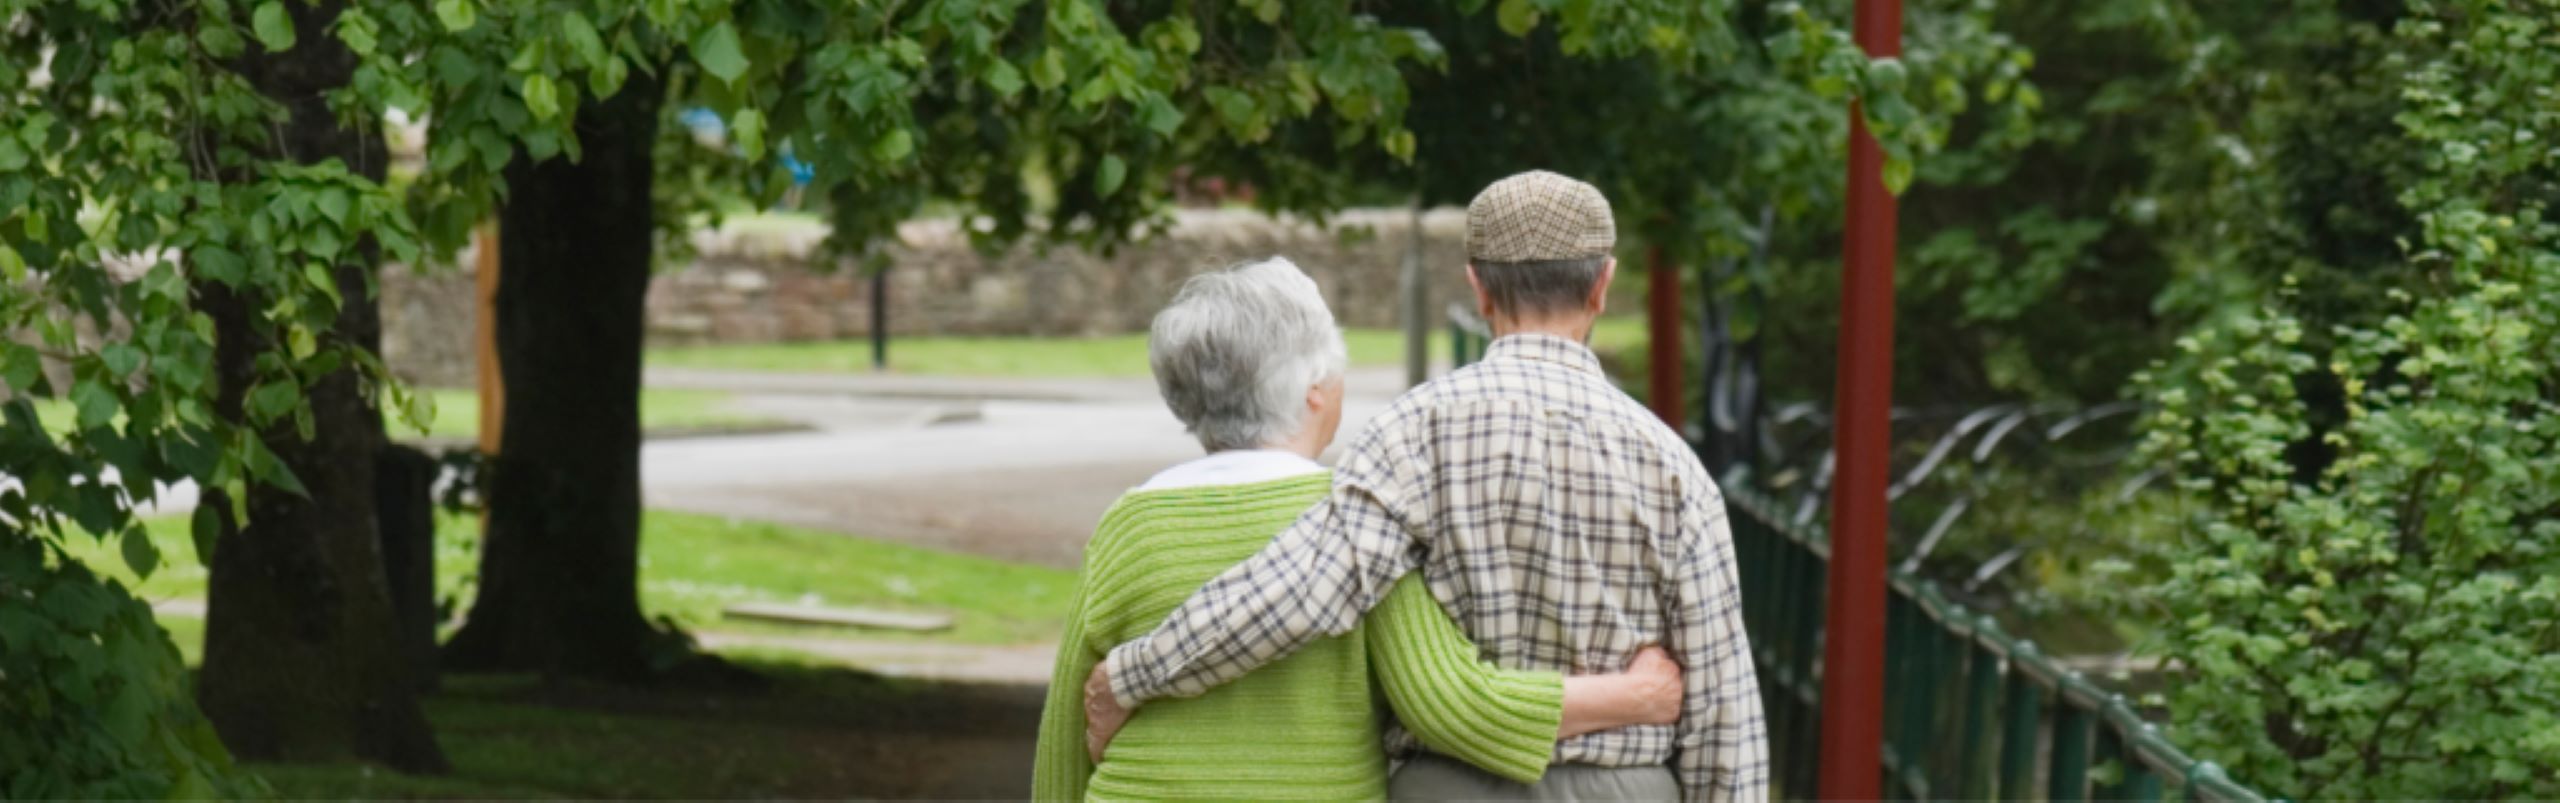 Senior couple hugging with their backs turned walking outside